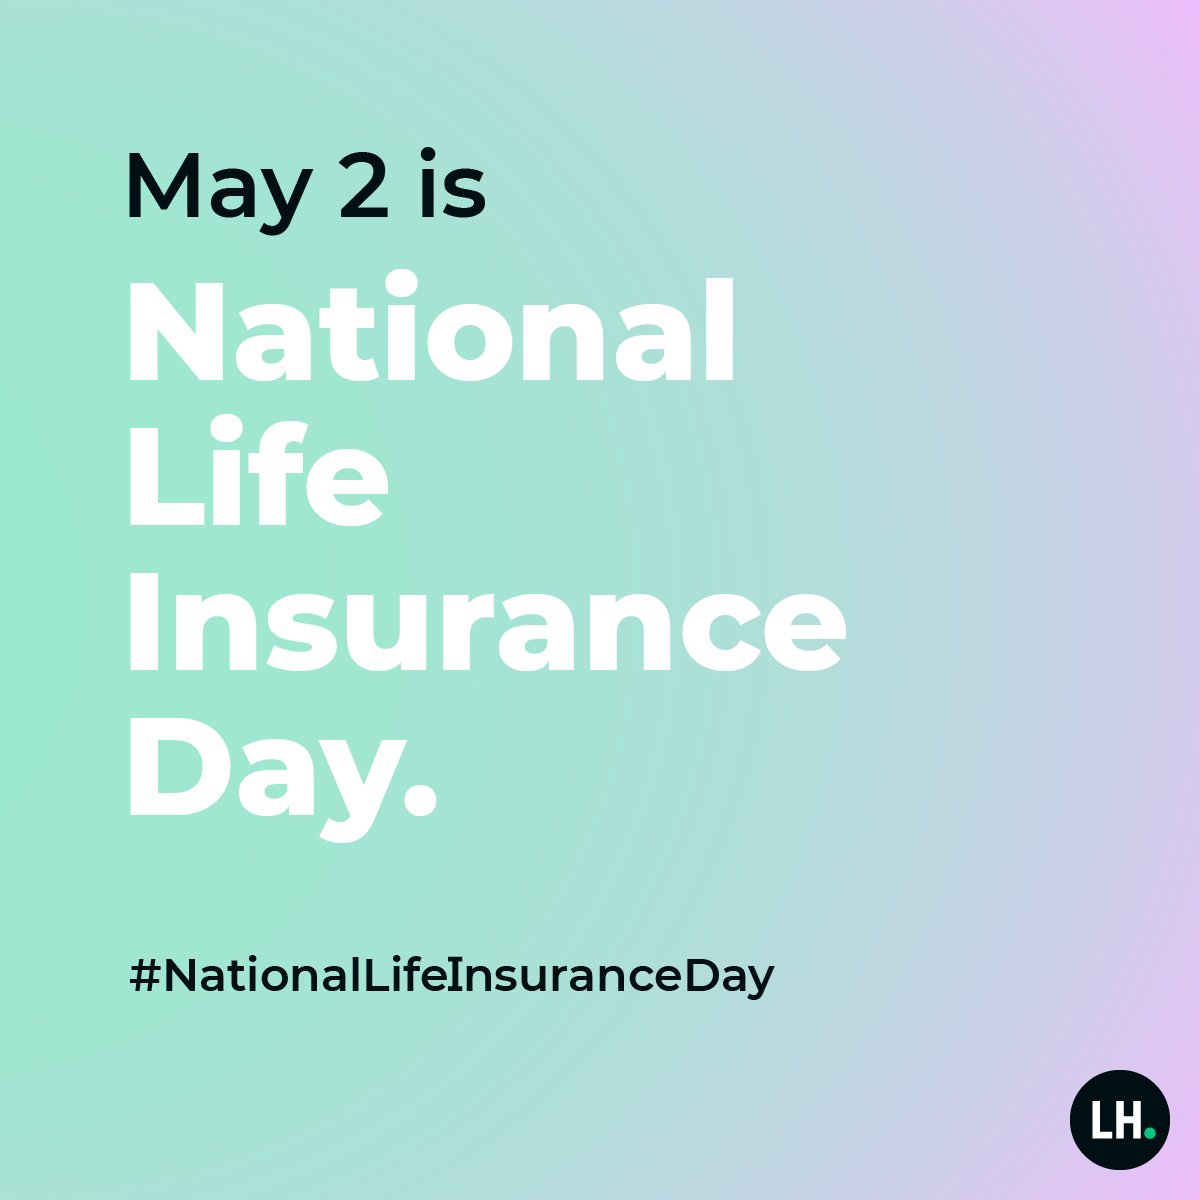 Today is #NationalLifeInsuranceDay and a great reminder that now is the best time to get the life insurance you need. #GetLifeInsurance #eriefamilylife #independentinsuranceagent